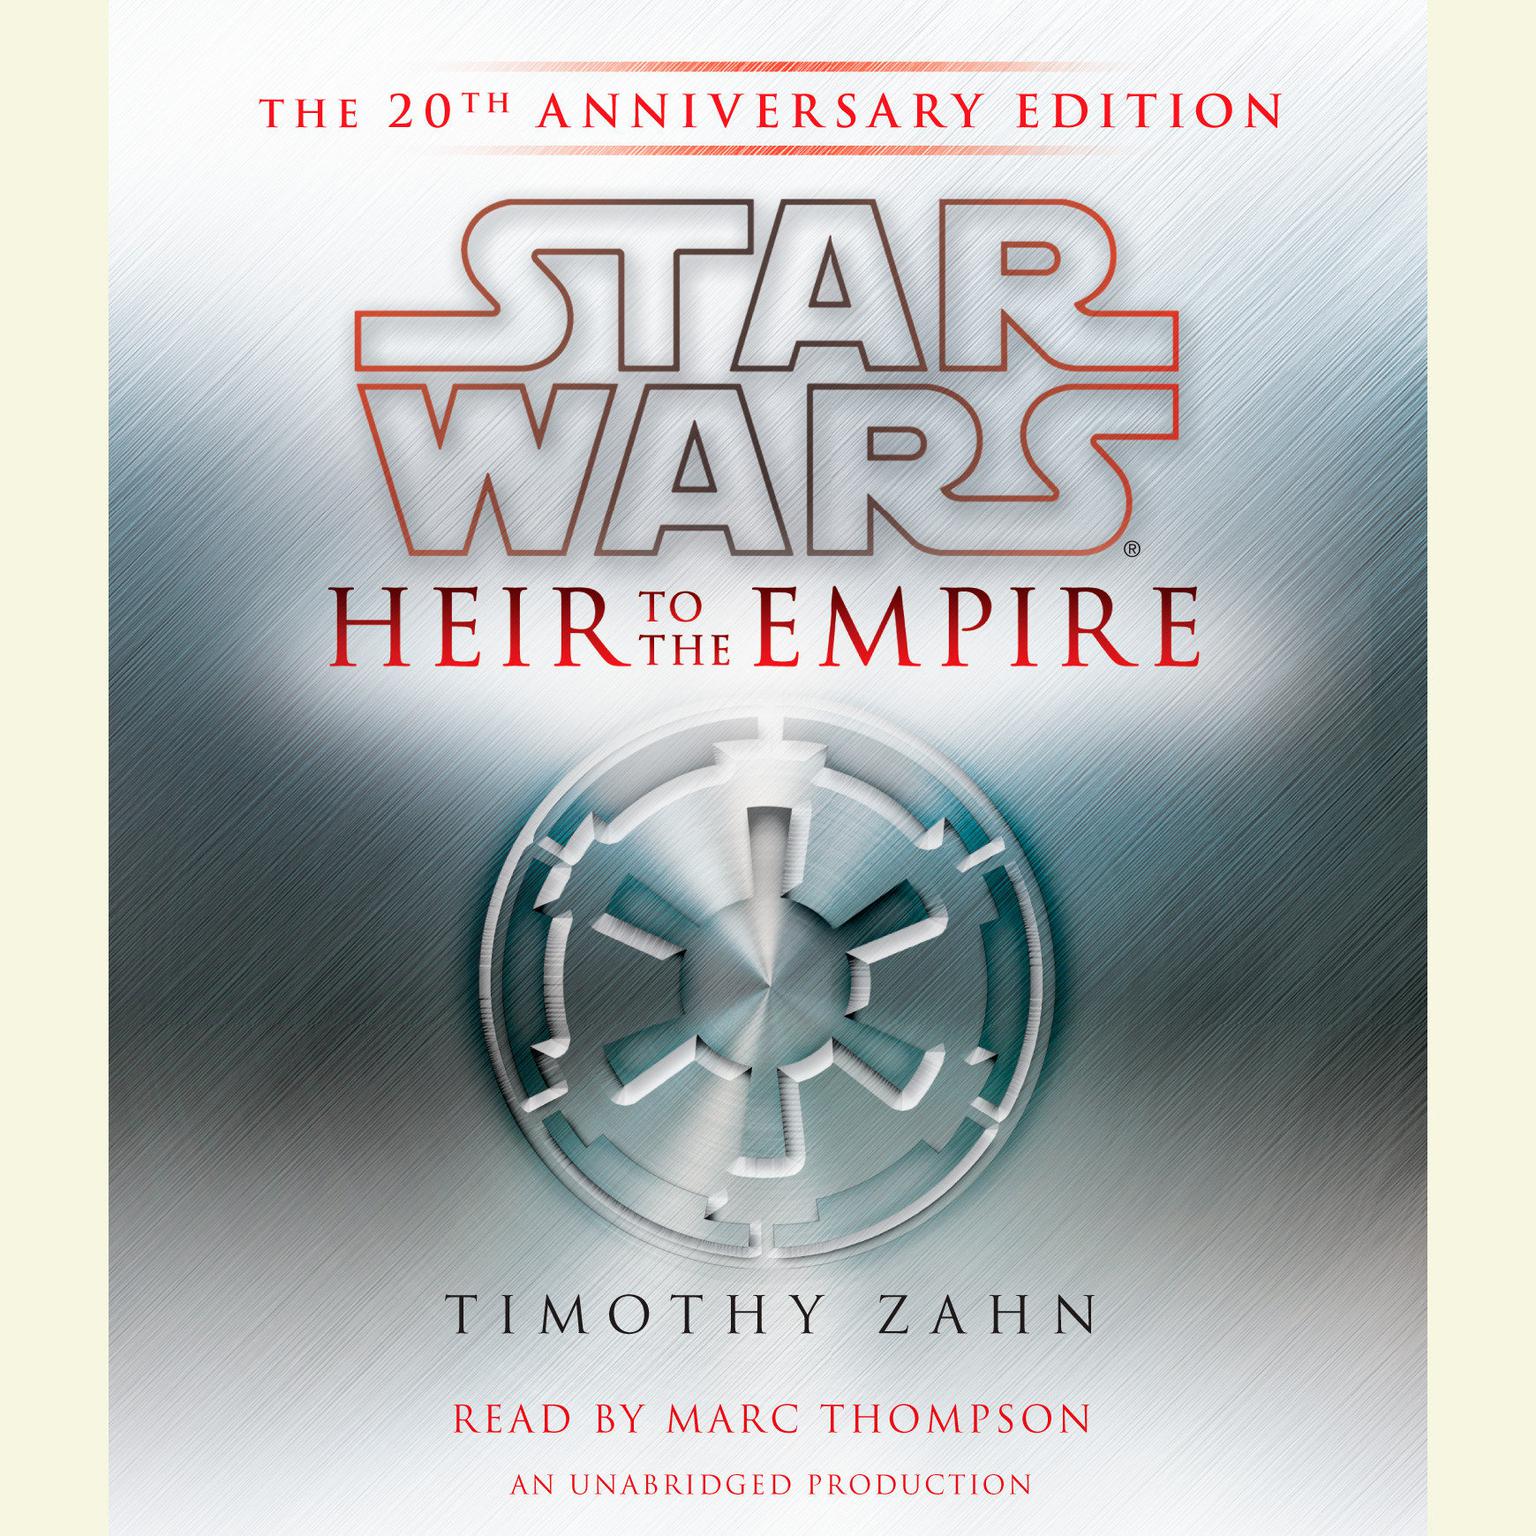 Heir to the Empire: Star Wars: The 20th Anniversary Edition Audiobook, by Timothy Zahn